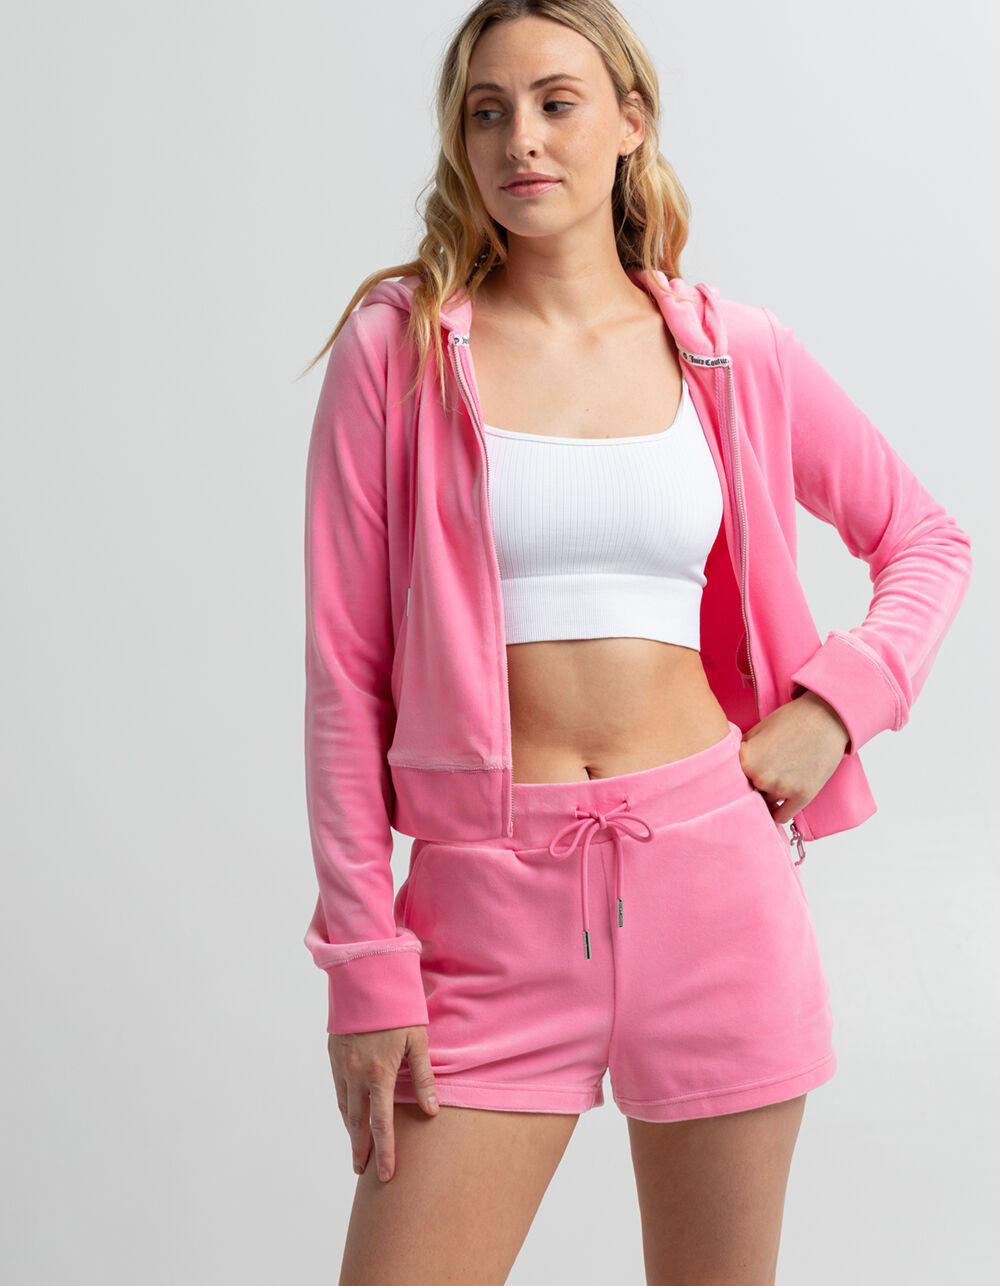 JUICY COUTURE Womens Velour Bling Shorts - HOT PINK